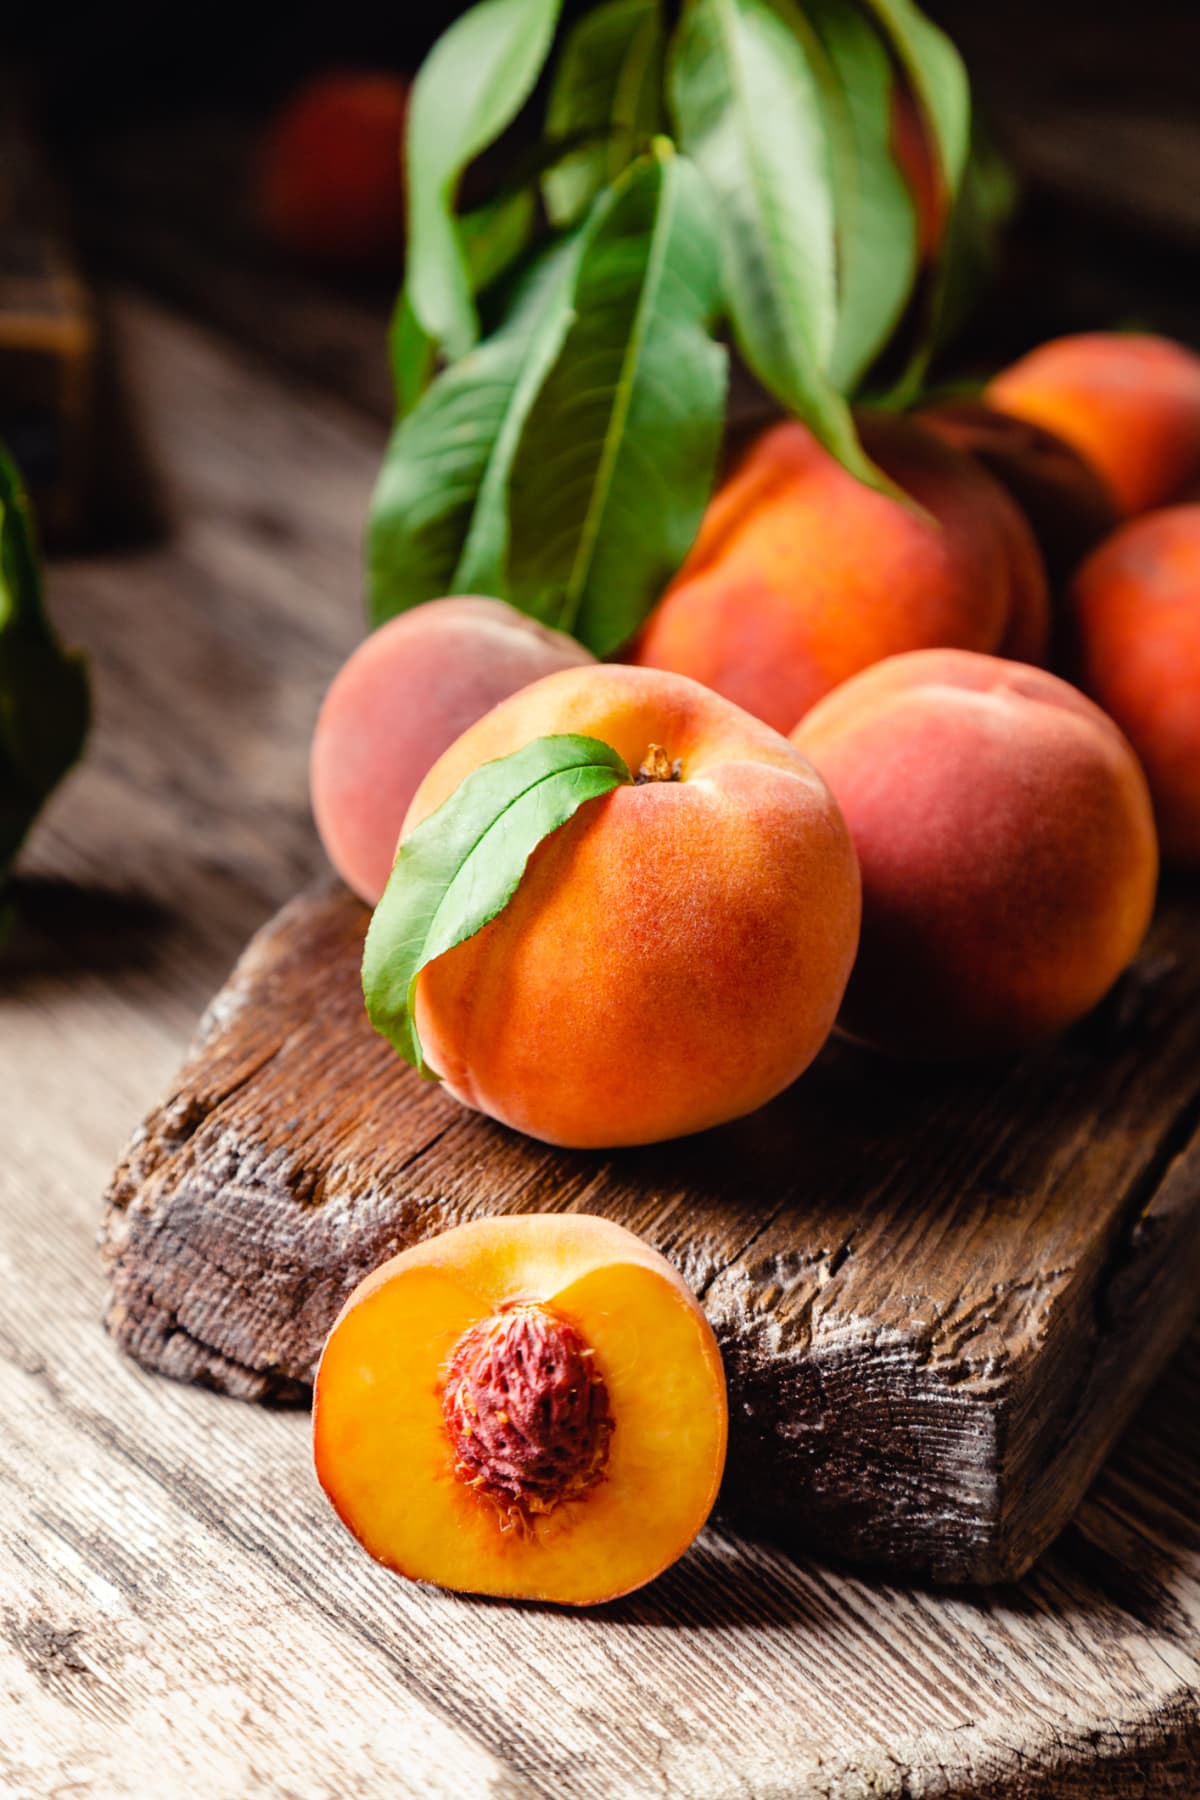 Peaches with leaves on dark wooden board with peach in halves with peach seed stone.